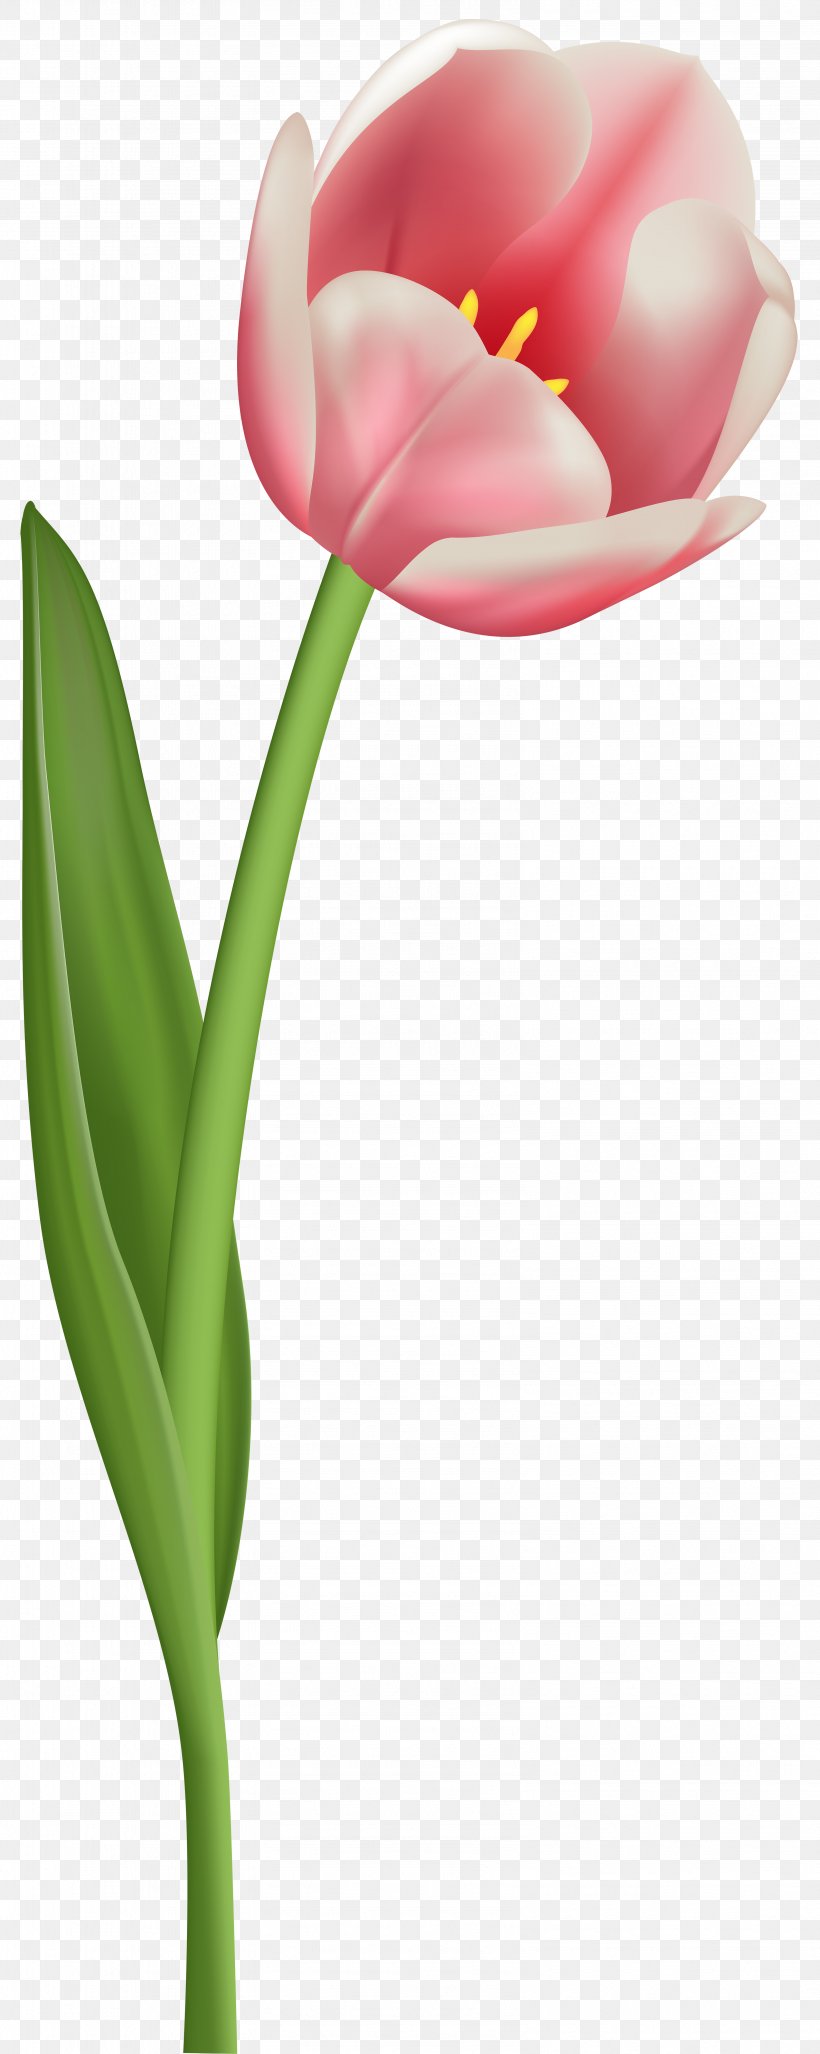 Tulip Mania IPhone 8, PNG, 3193x8000px, Tulip Mania, Close Up, Cut Flowers, Digital Image, Flower Download Free